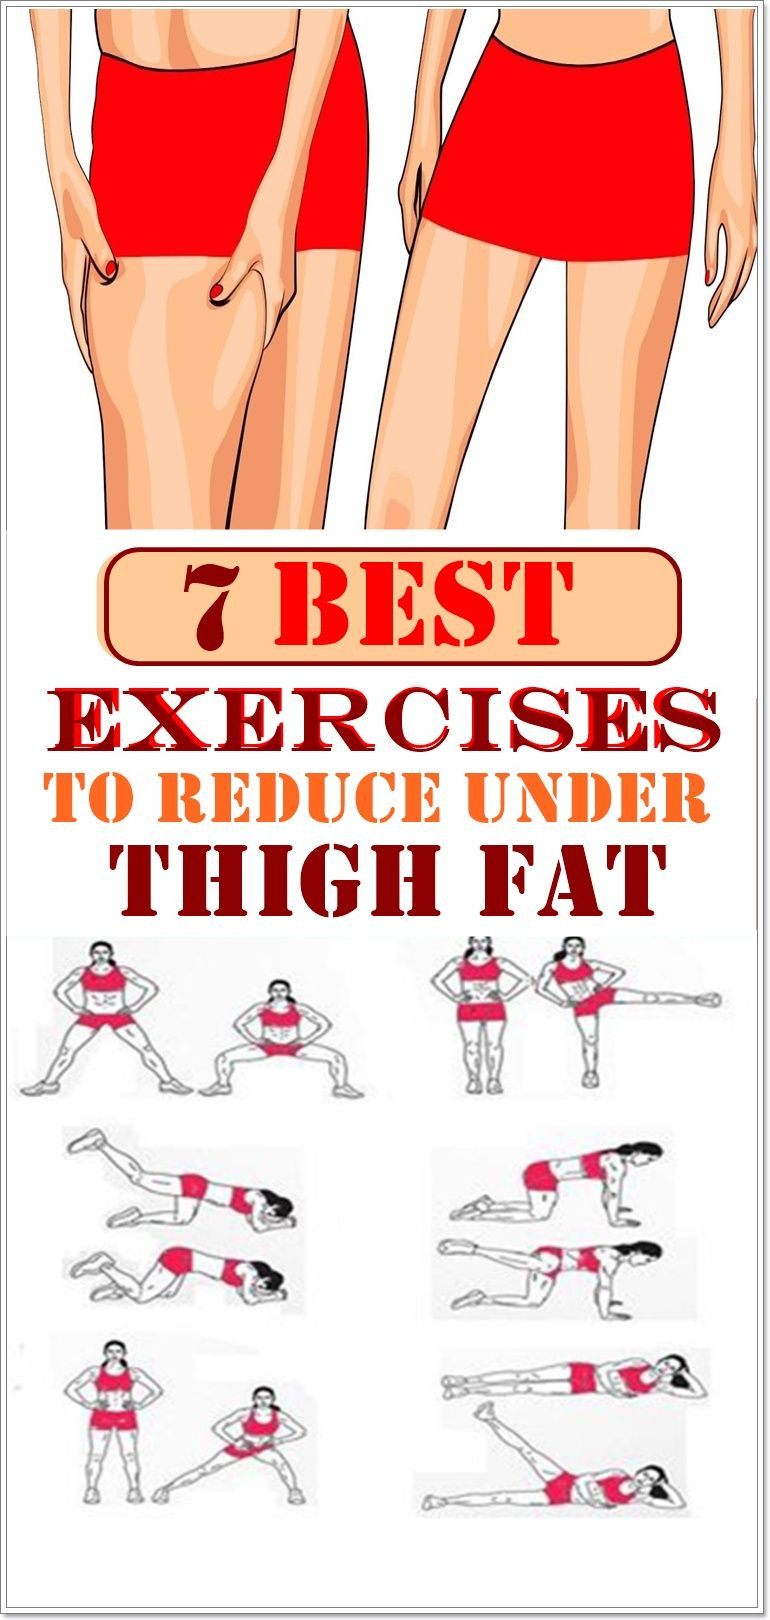 Thigh Weight Loss Exercise
 Pin on ᵂᴼᴿᴷᴼᵁᵀ